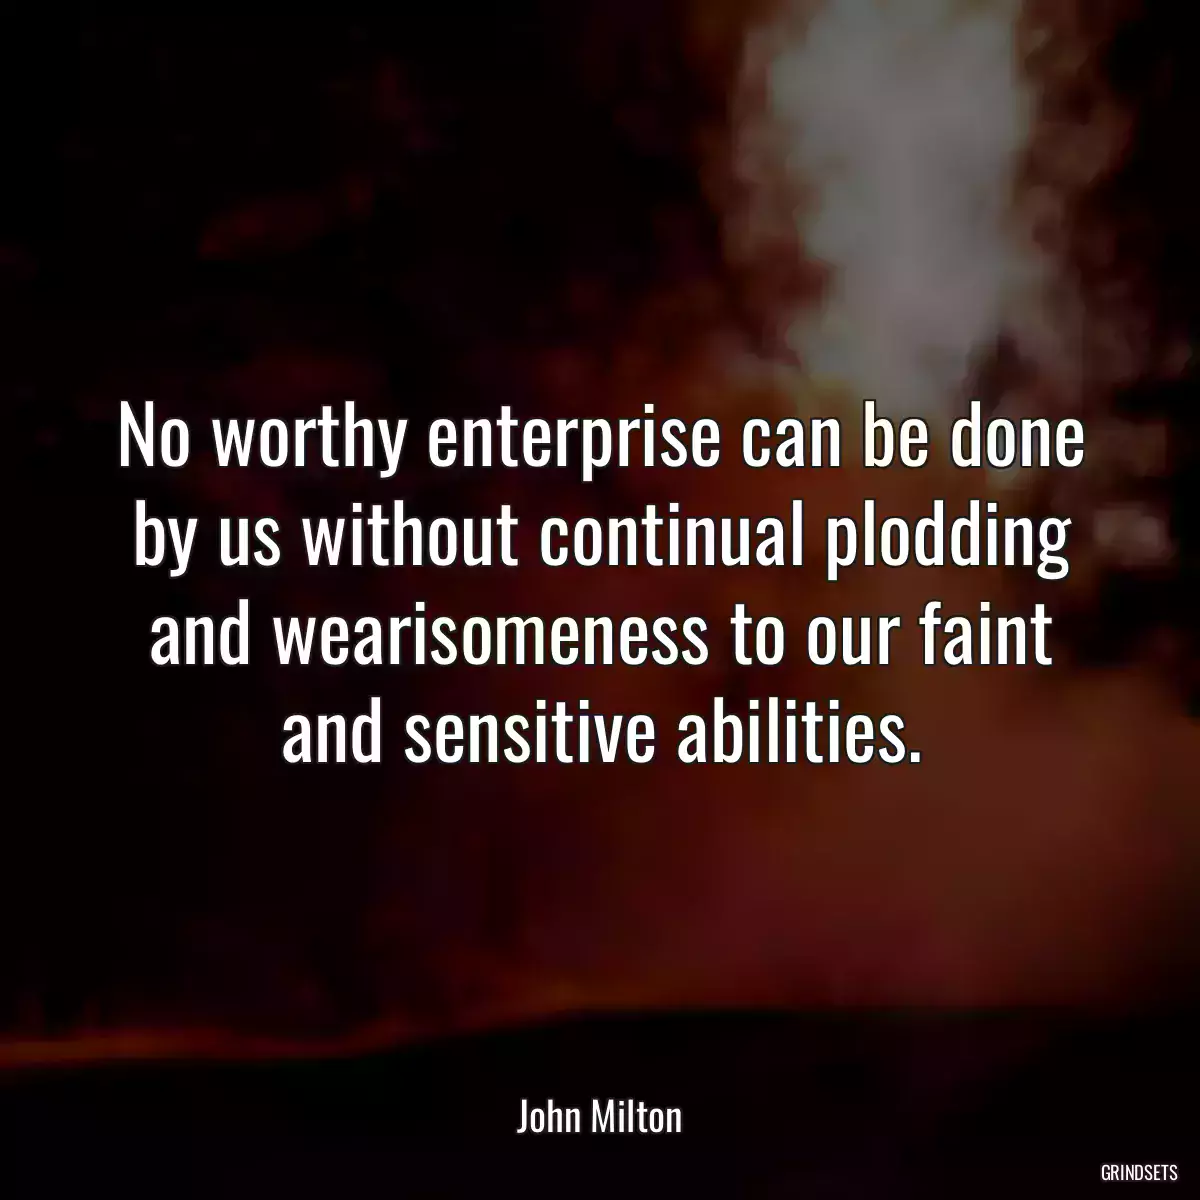 No worthy enterprise can be done by us without continual plodding and wearisomeness to our faint and sensitive abilities.